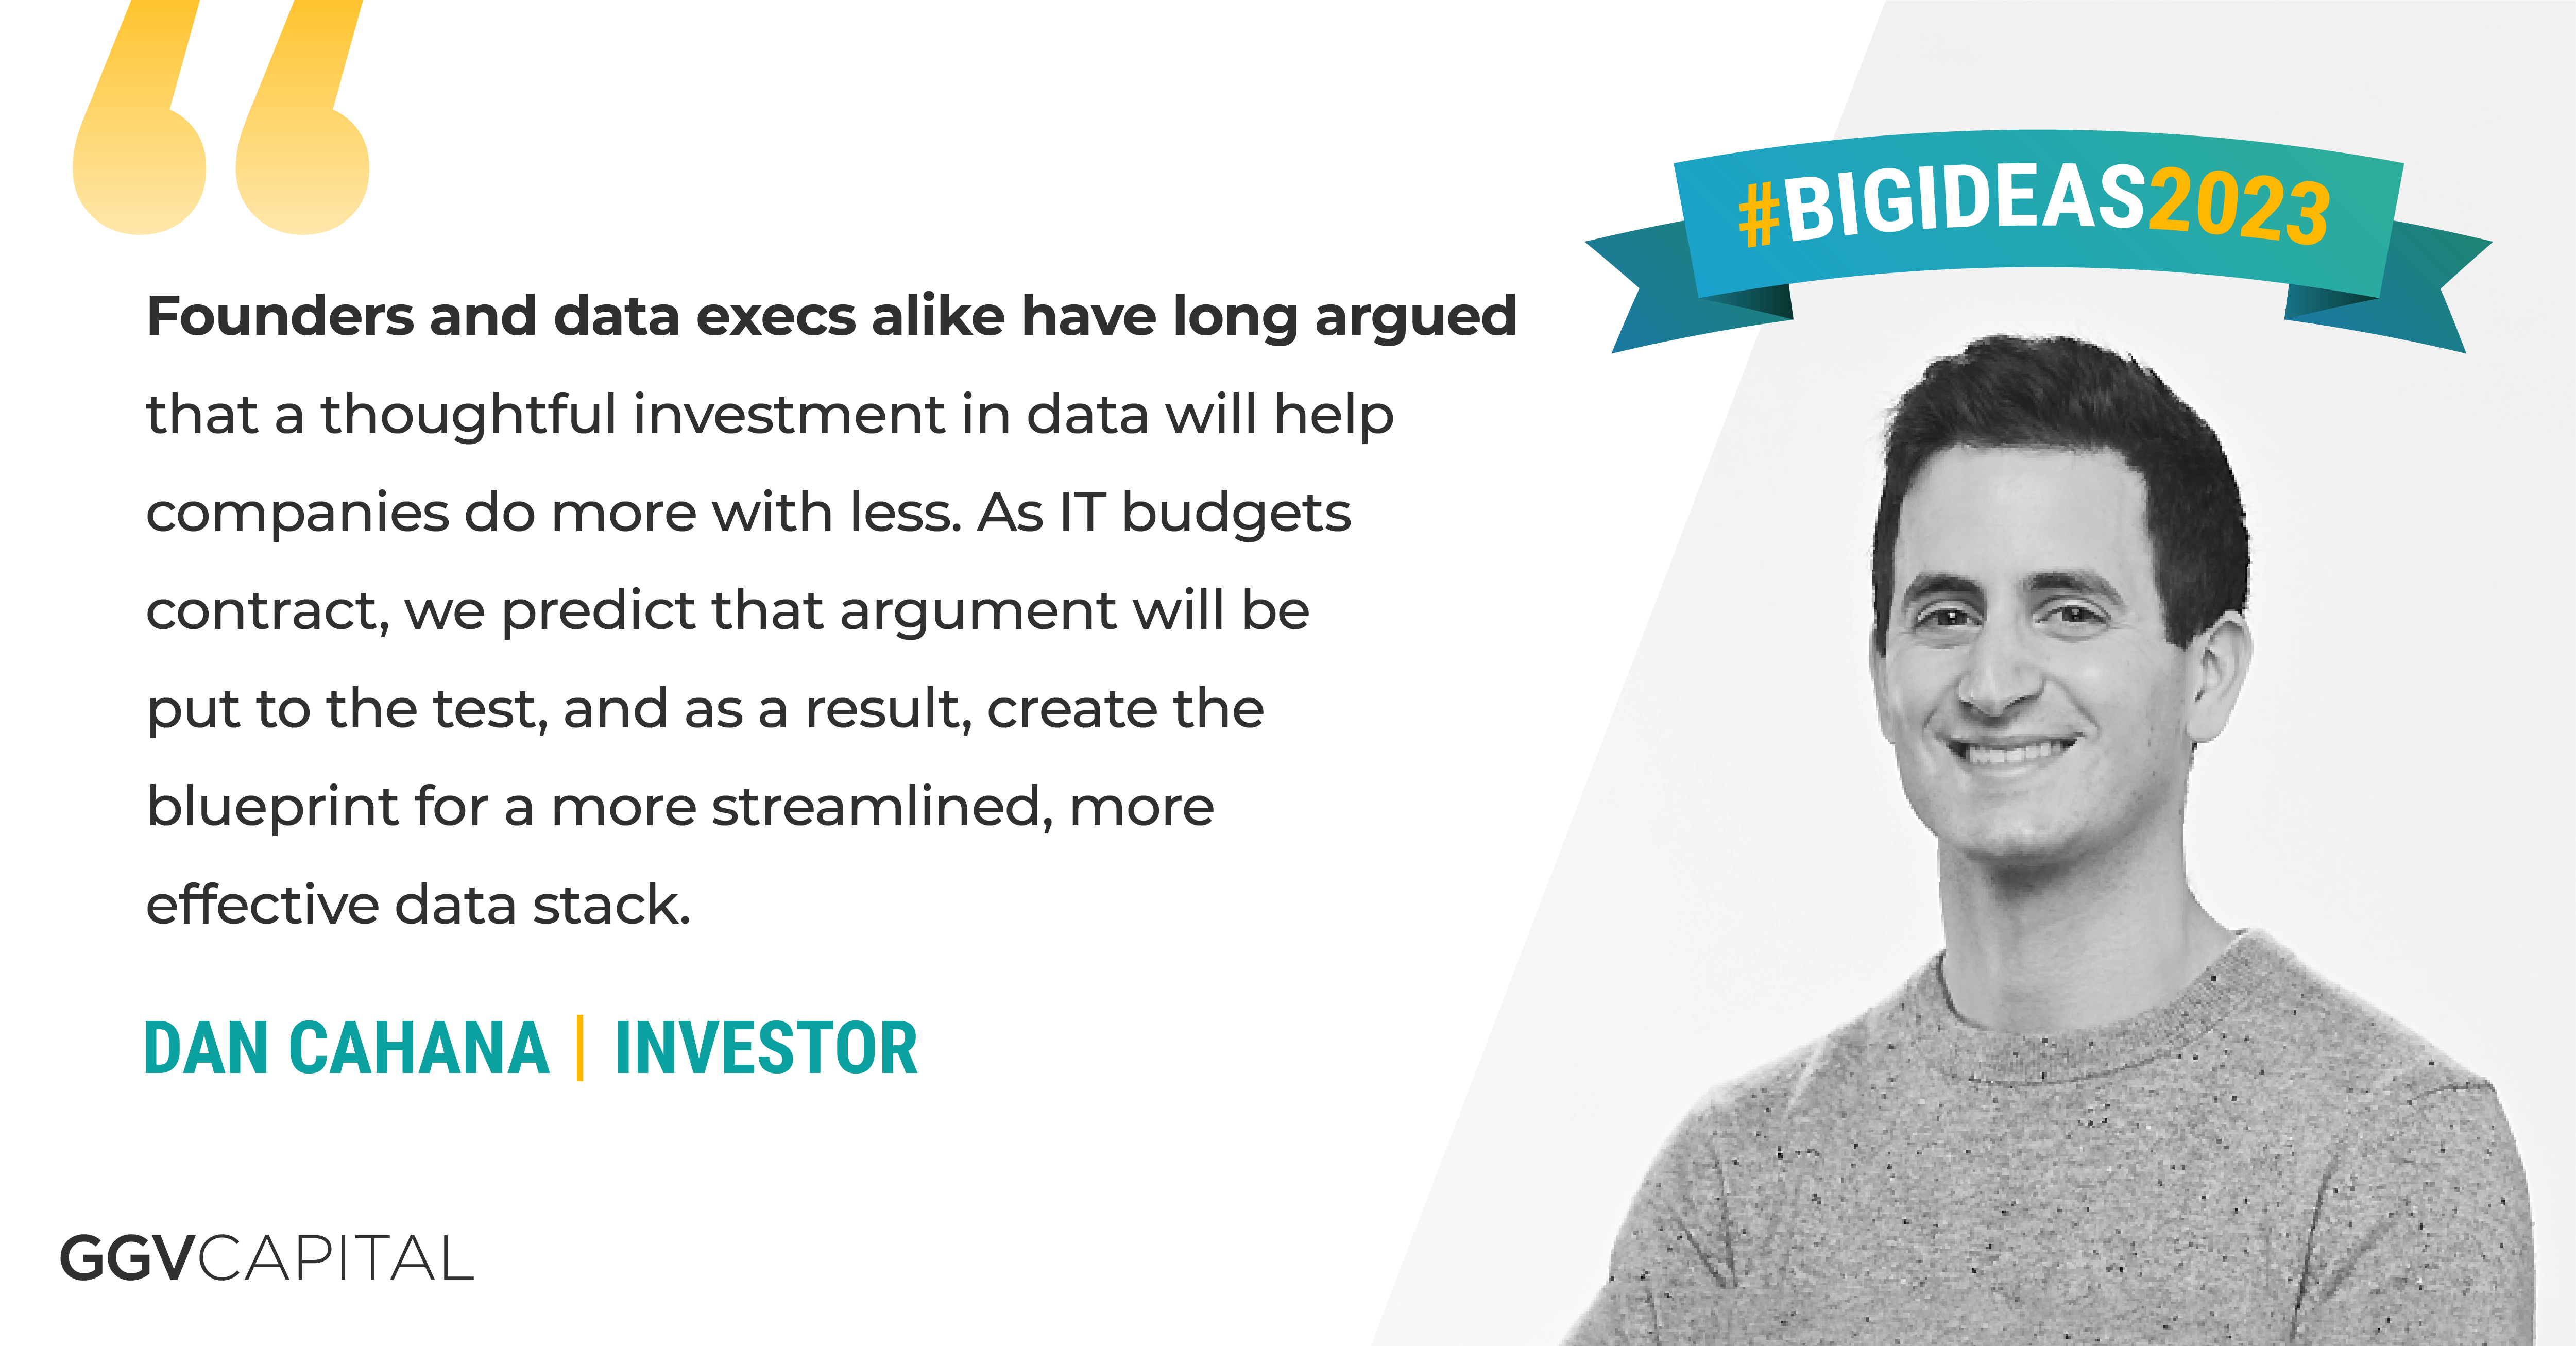 “Founders and data execs alike have long argued that a thoughtful investment in data will help companies do more with less. As IT budgets contract, we predict that argument will be put to the test, and as a result, create the blueprint for a more streamlined, more effective data stack.” —Dan Cahana, Investor at GGV Capital